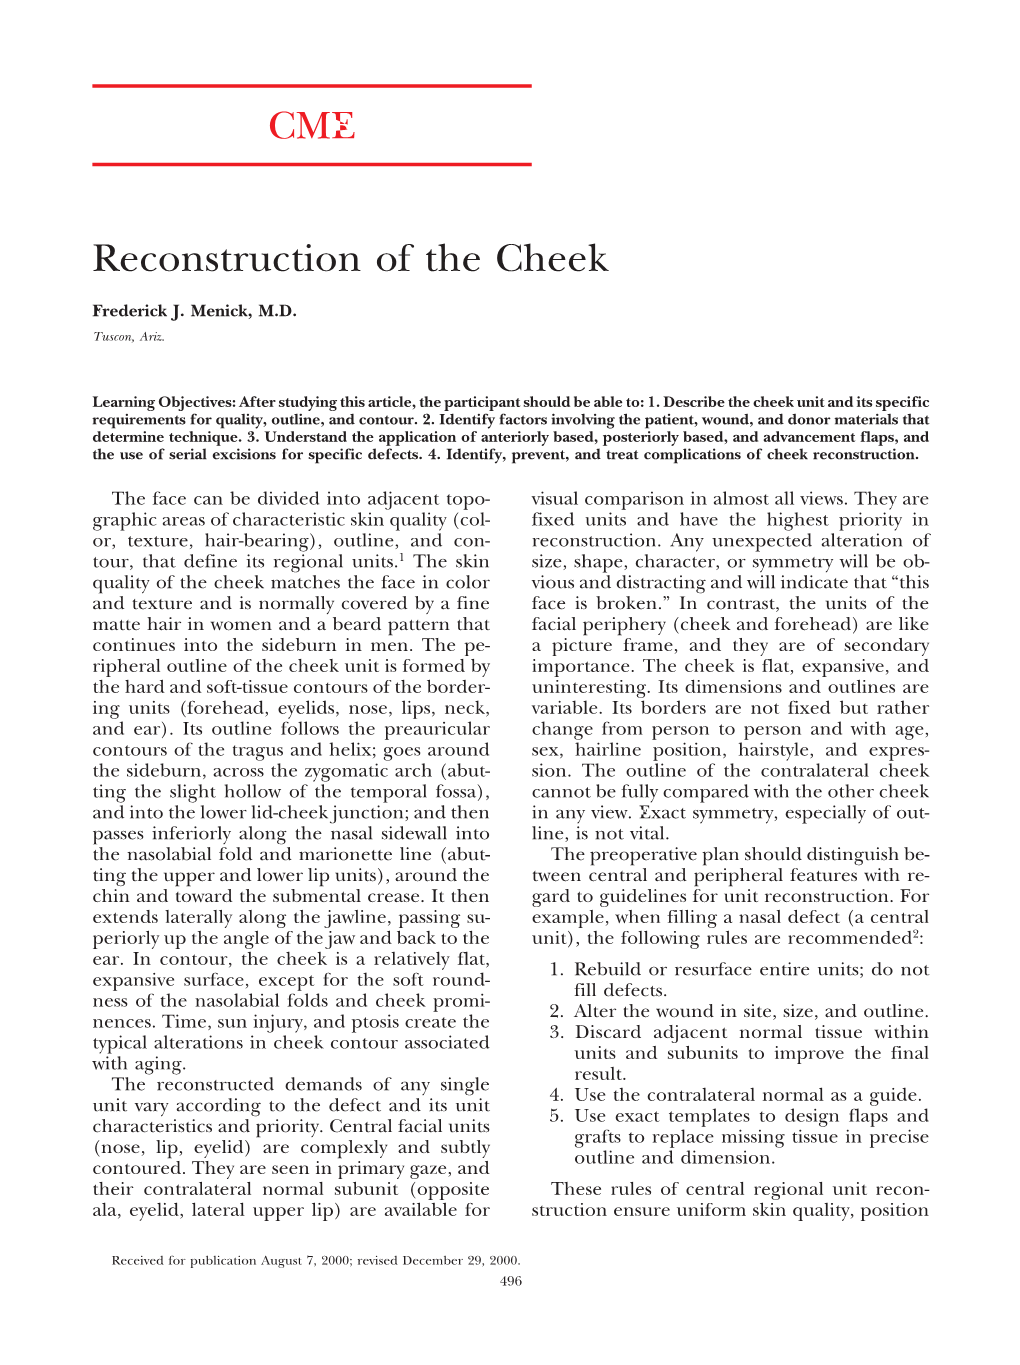 CME Reconstruction of the Cheek